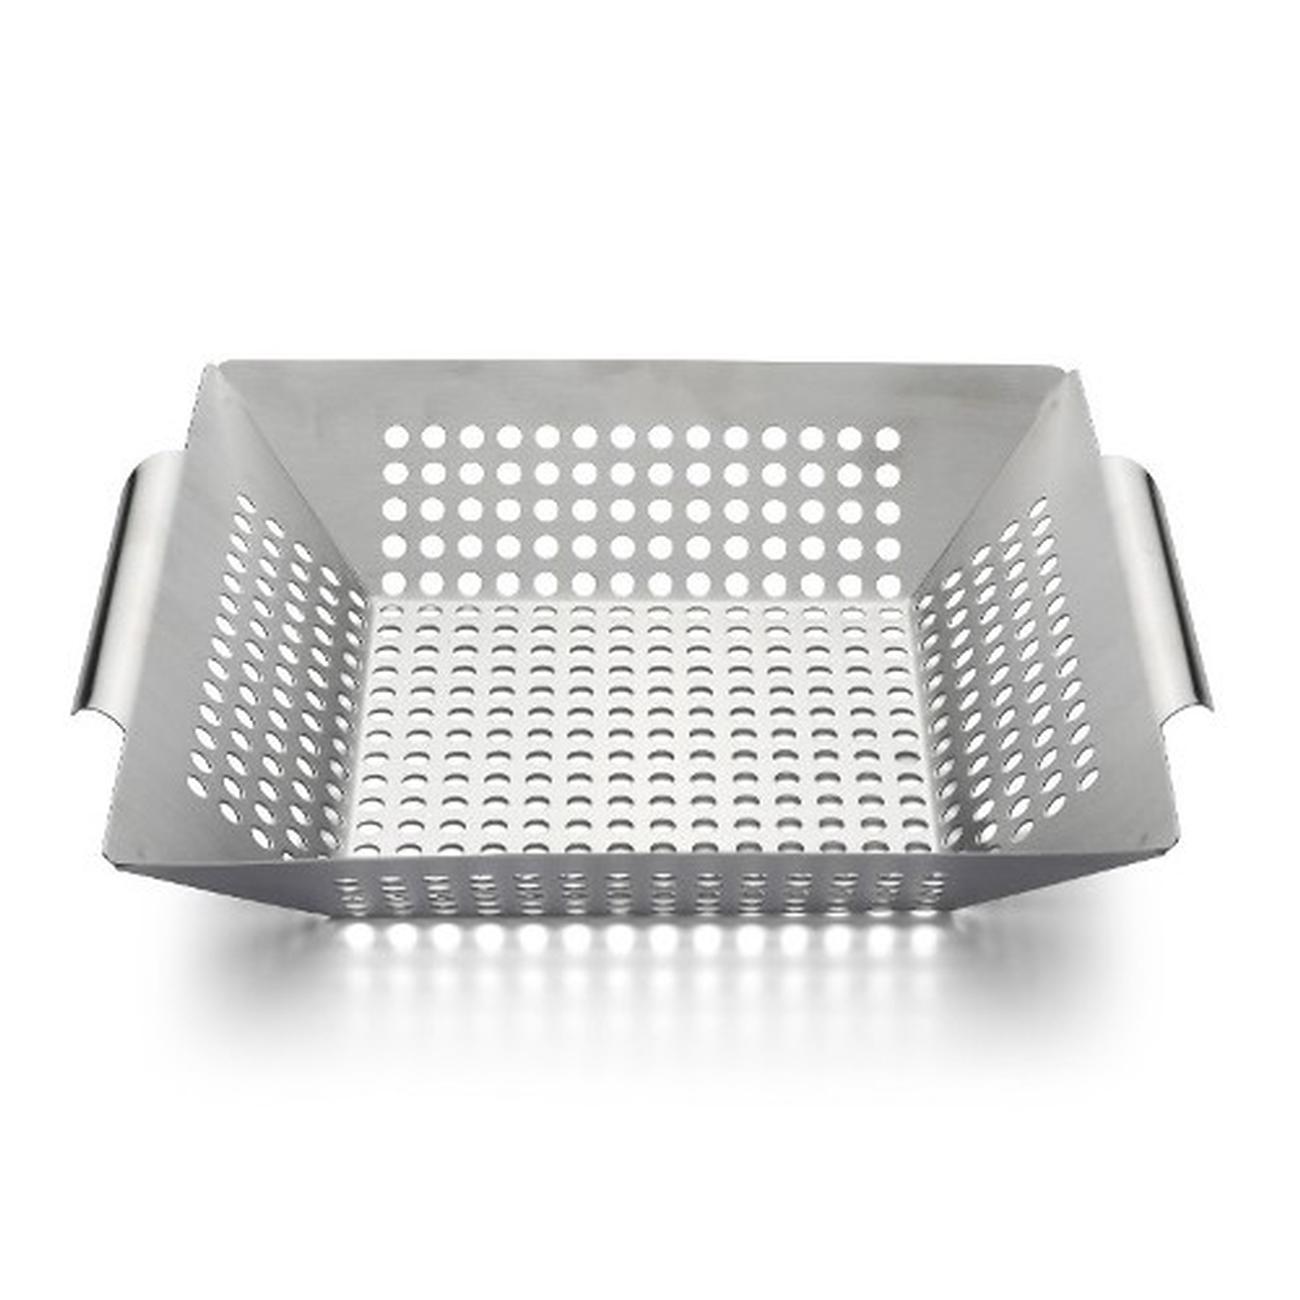 weis-stainless-steel-bbq-grilling-basket-30cm - Stainless Steel Grill Basket Tray 30cm